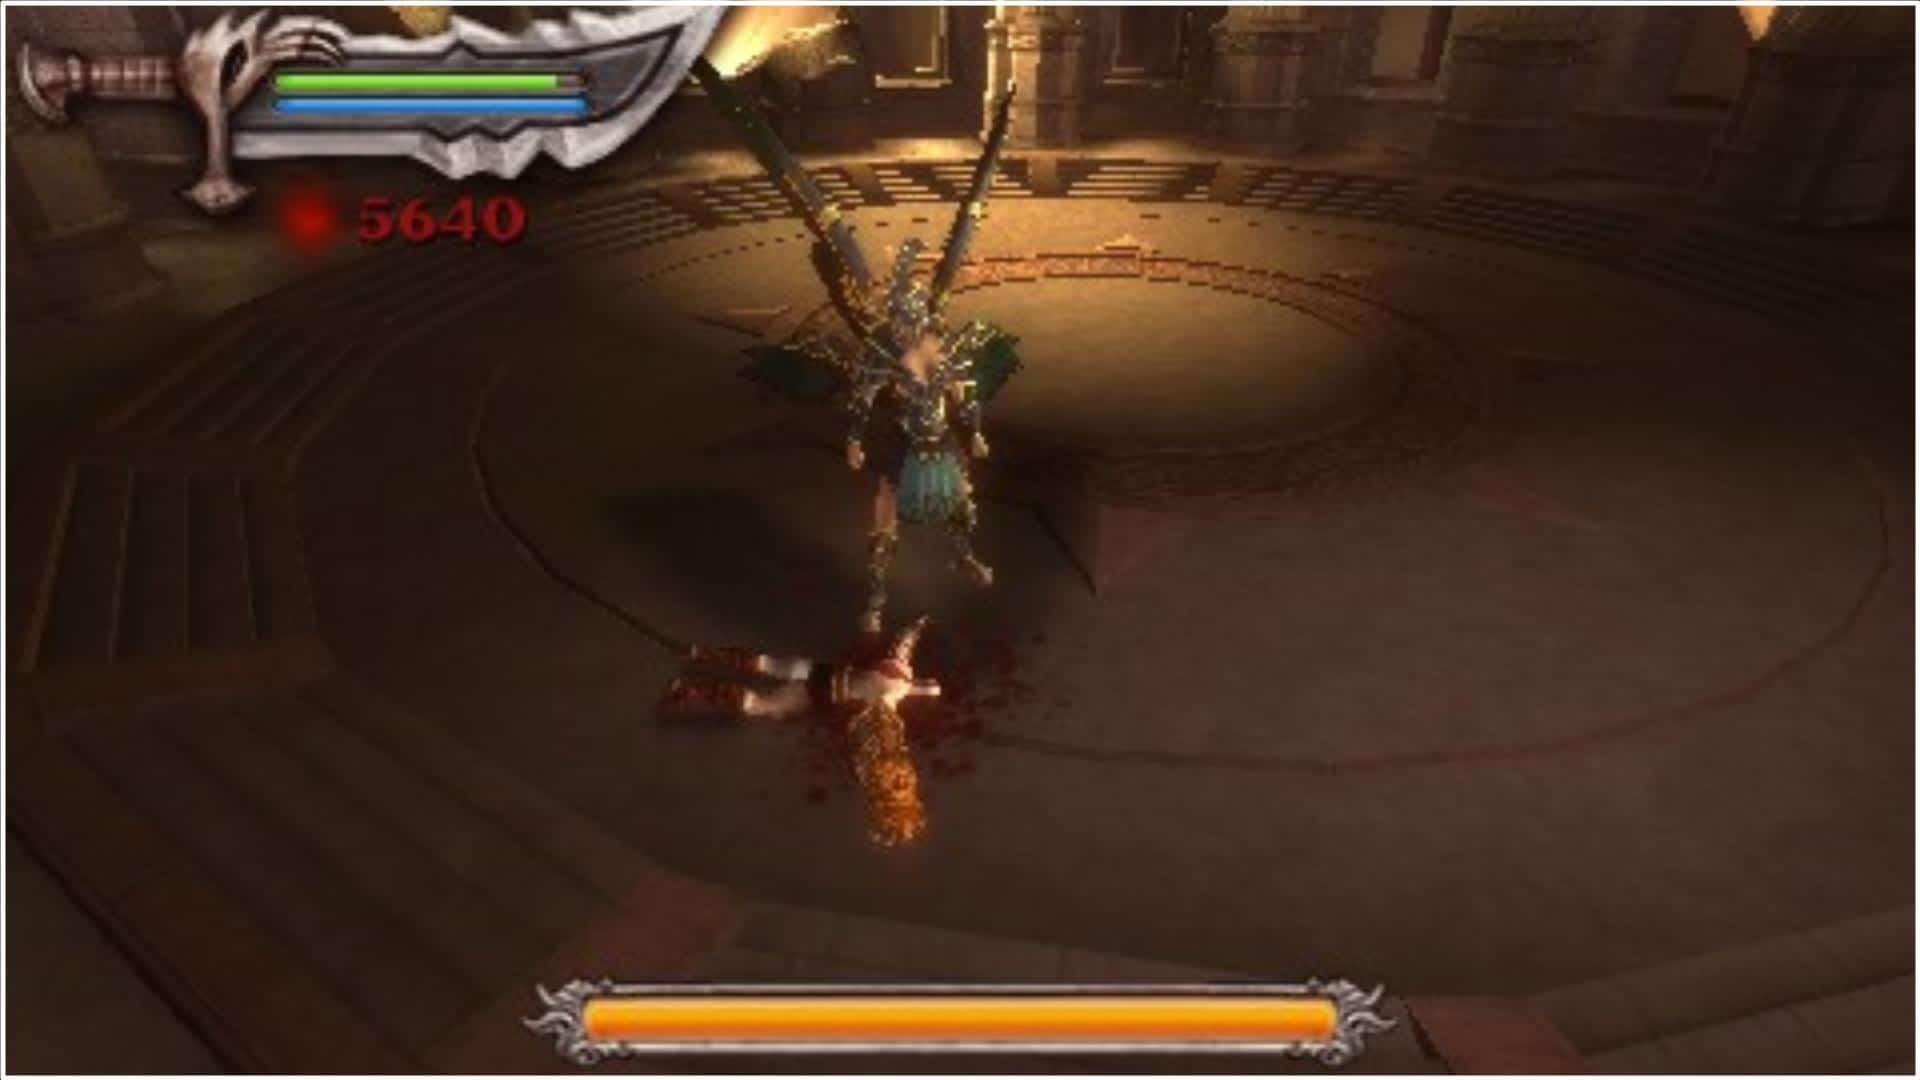 God Of War - Chains Of Olympus PSP ISO For Android Free Download - GamesApks